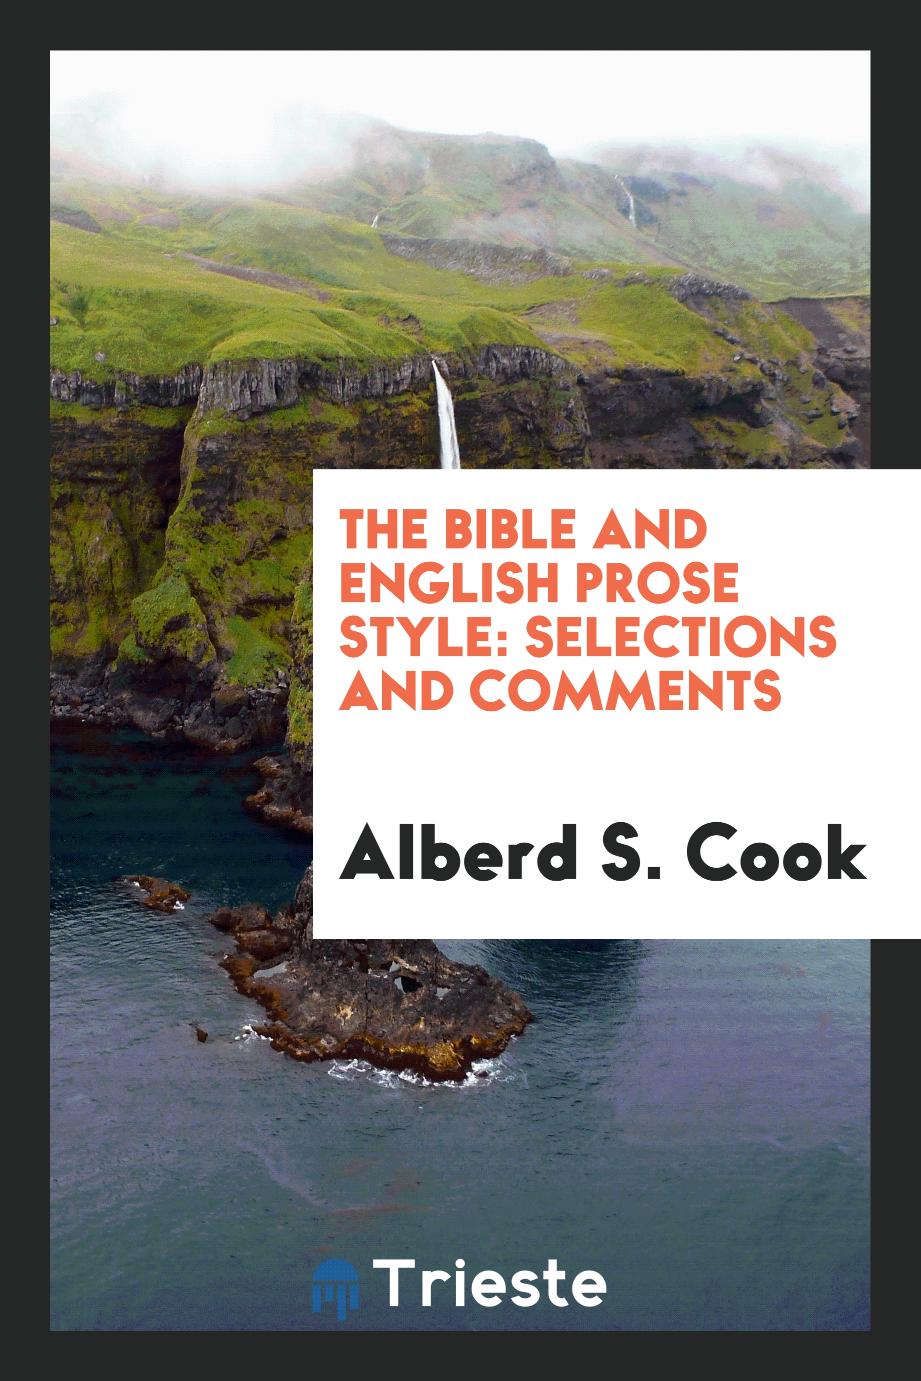 The Bible and English Prose Style: Selections and Comments